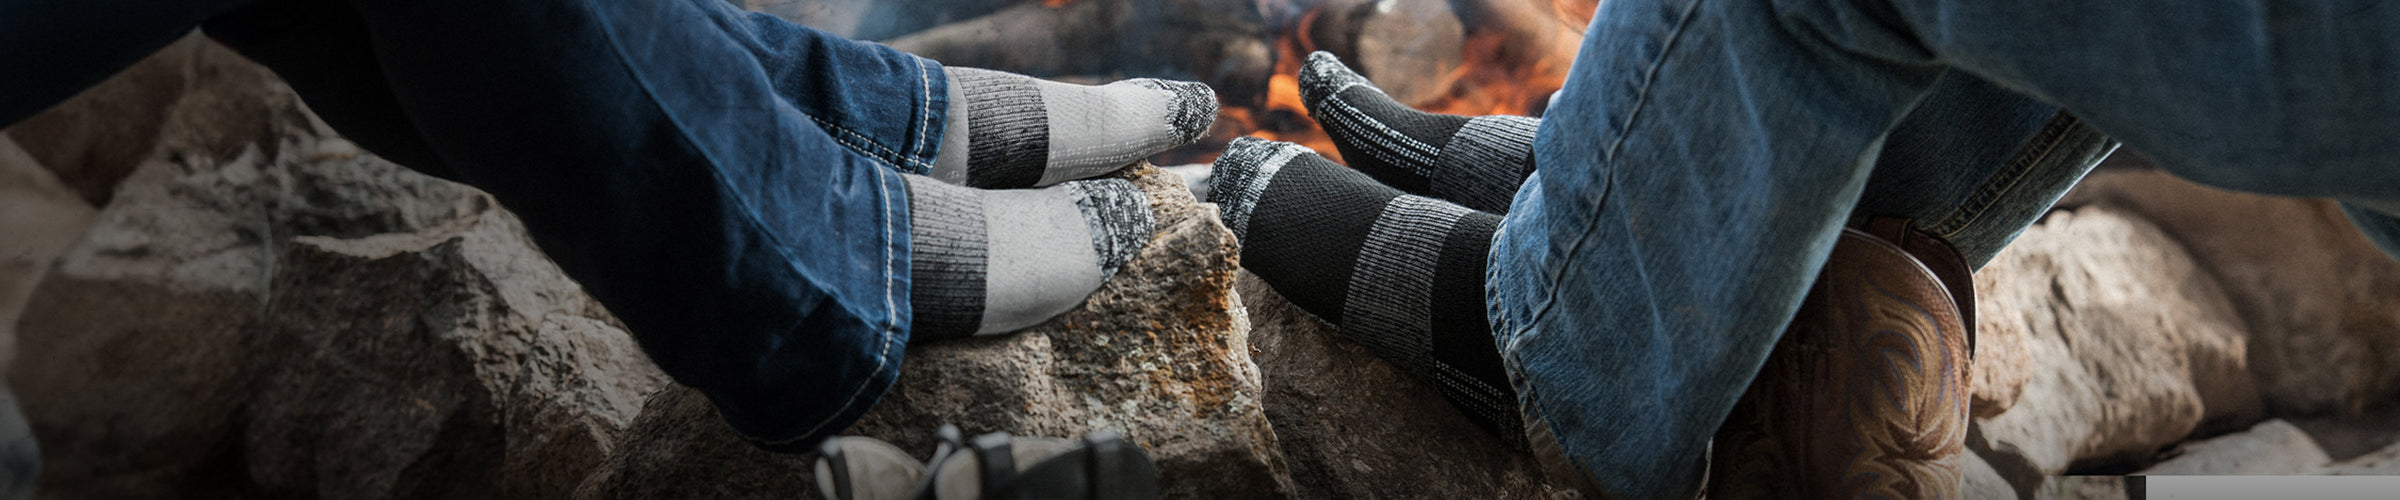 2 people in their socks warming their feet bay the fire 